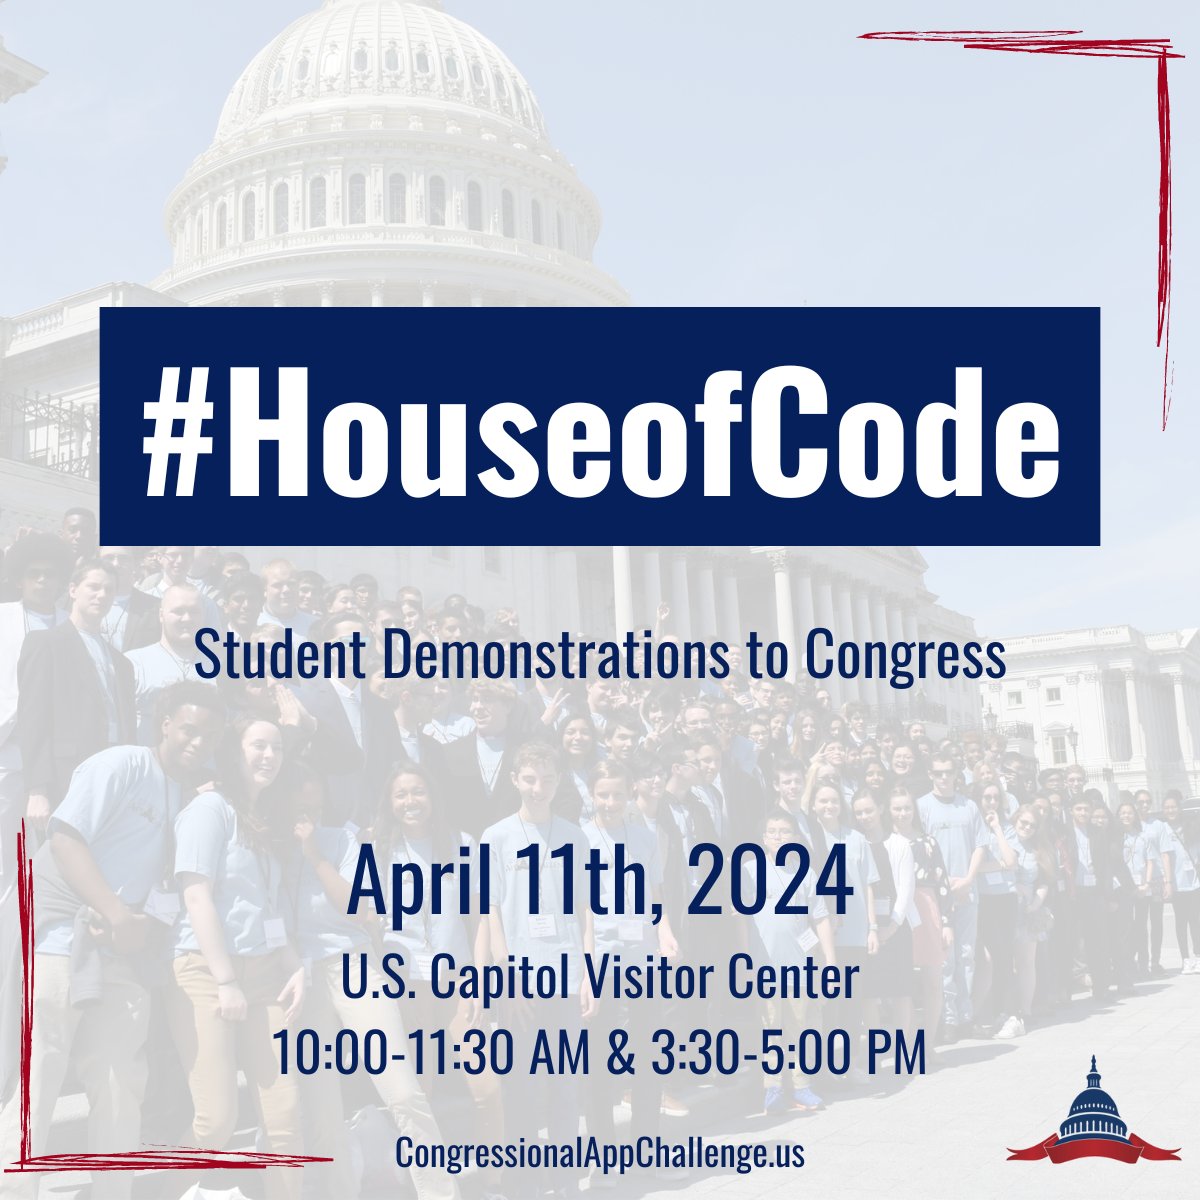 #HouseOfCode is next week - and you're invited to join Congress for Student Demonstrations in the U.S. Capitol! Over 360 students from 47 states will be presenting their winning apps to Congress on April 11th. More info and RSVP here: congressionalappchallenge.us/students/house… #Congress4CS